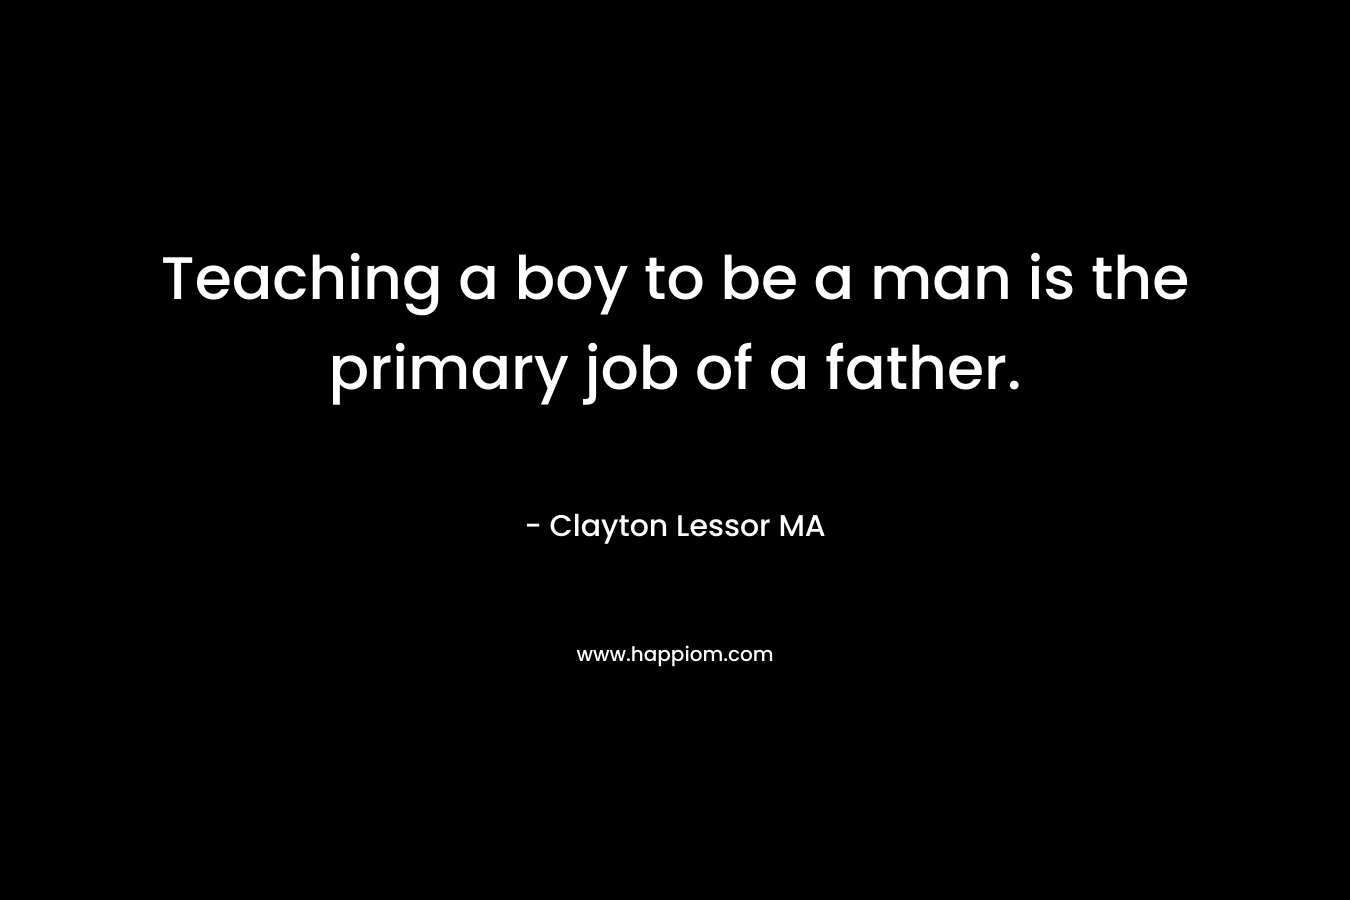 Teaching a boy to be a man is the primary job of a father. – Clayton Lessor MA